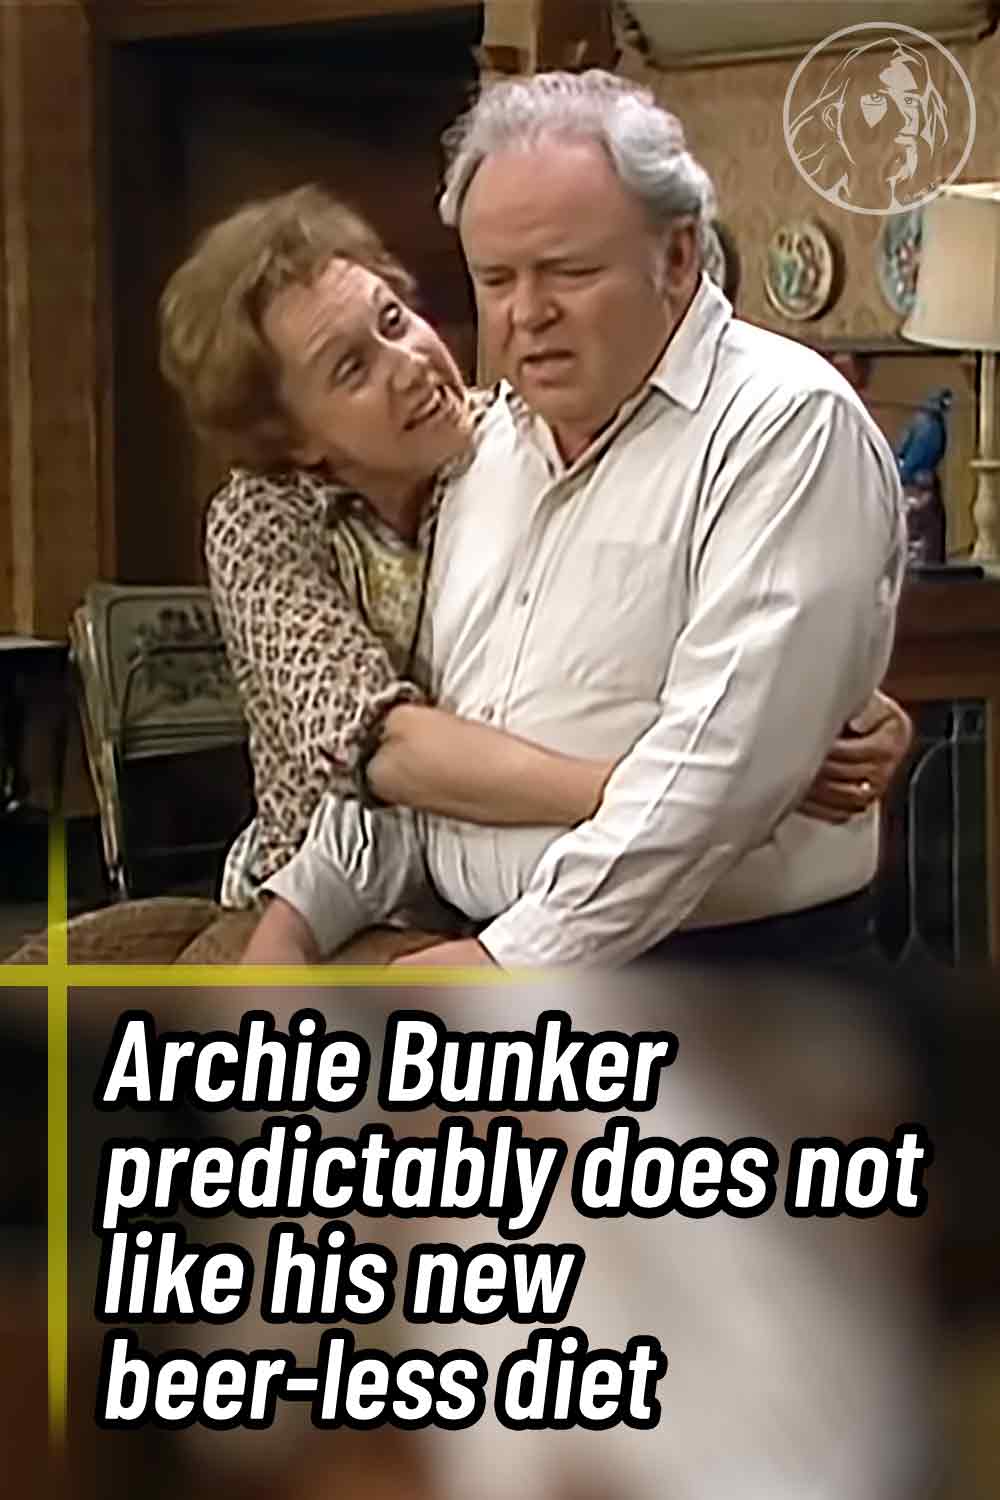 Archie Bunker predictably does not like his new beer-less diet